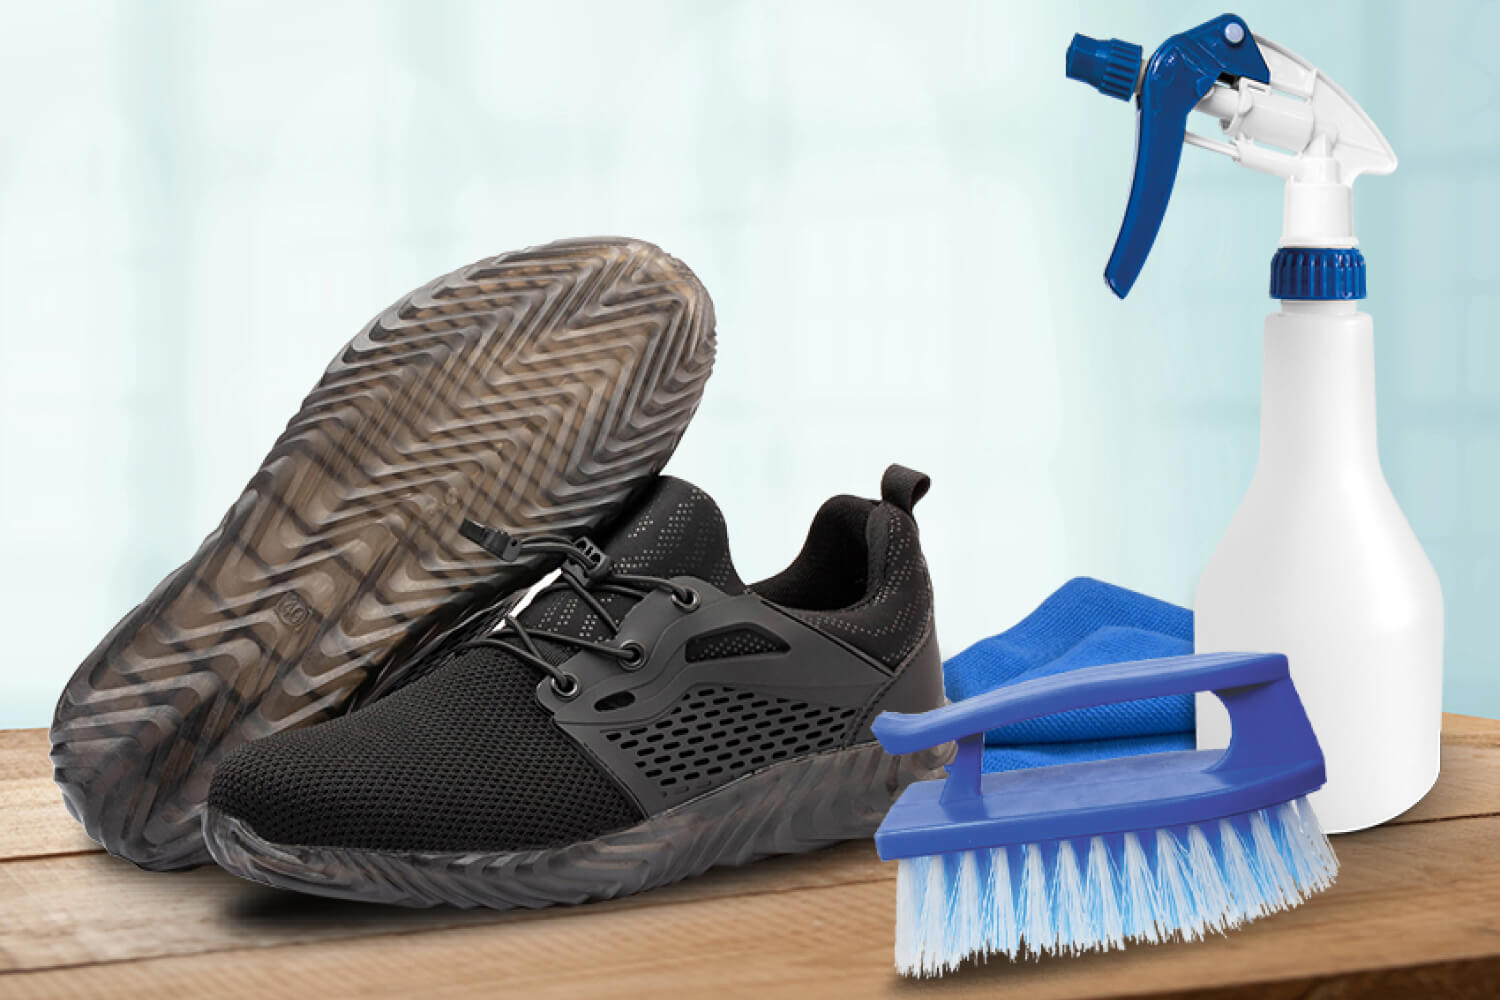 Essential Shoe Care Tips for Your Indestructible Shoes